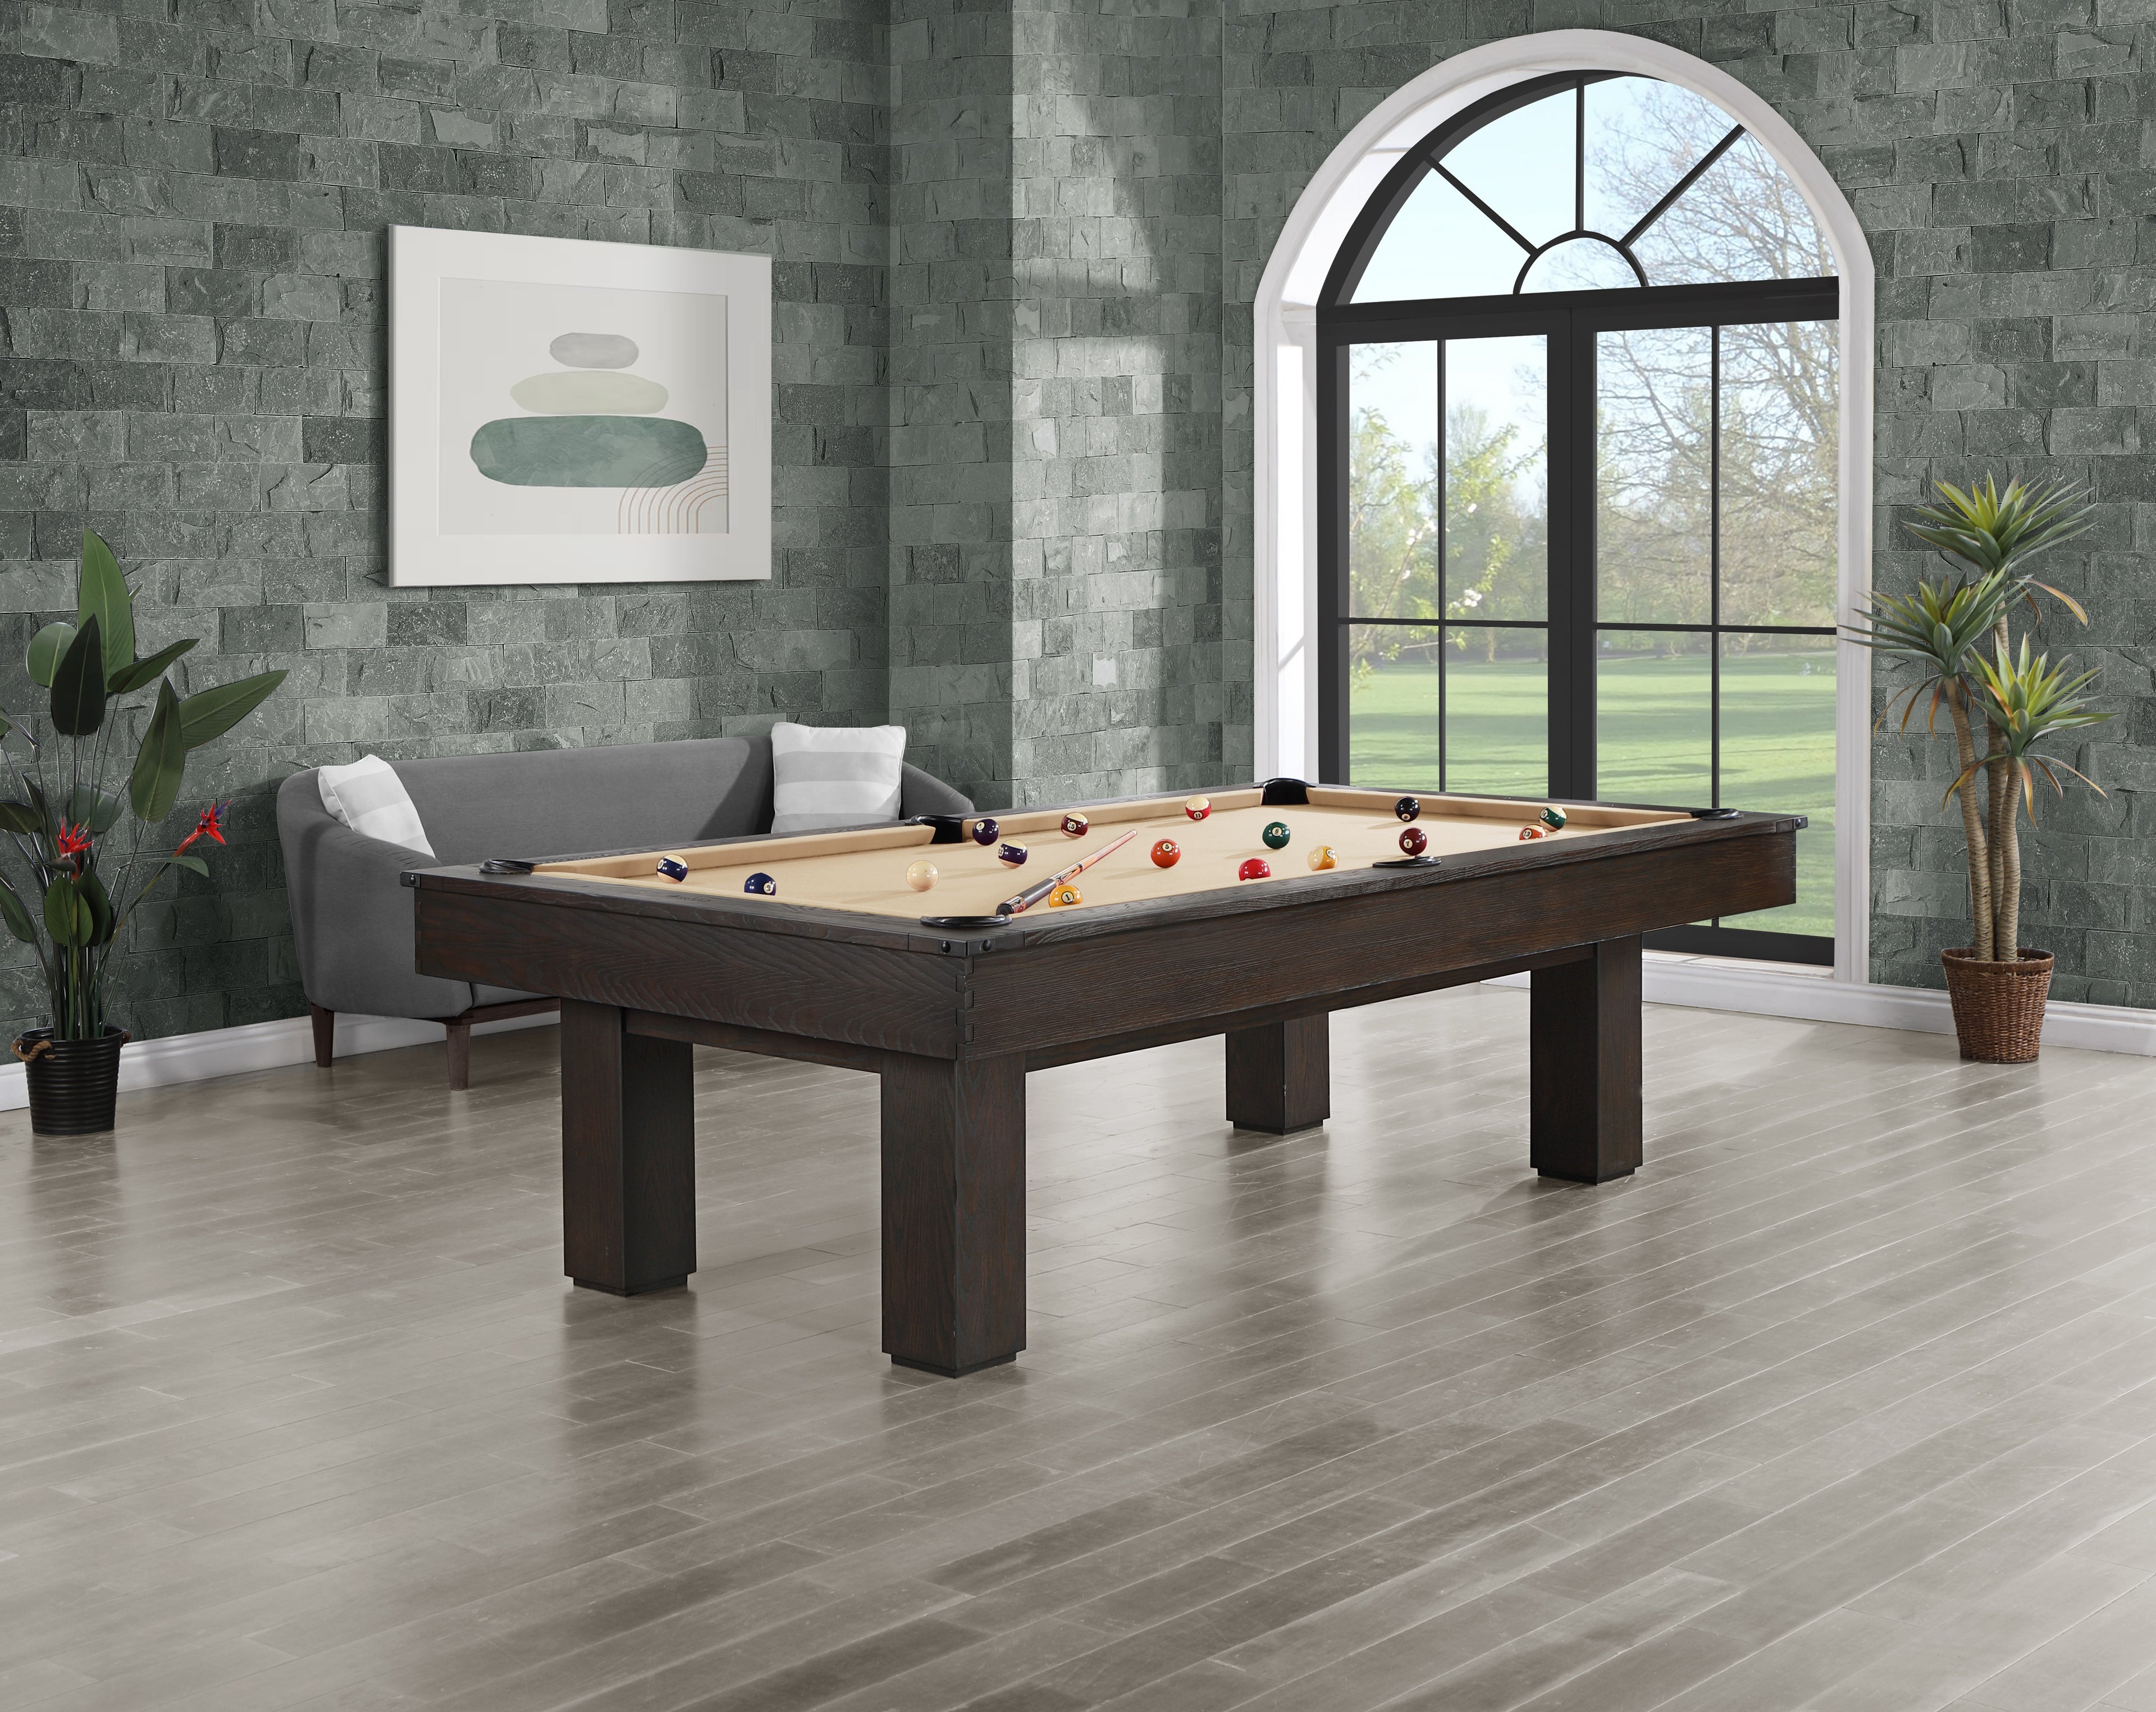 Legacy Billiards Colt II Pool Table in Whiskey Barrel Finish with Desert Cloth Rustic Room Scene - Angle View